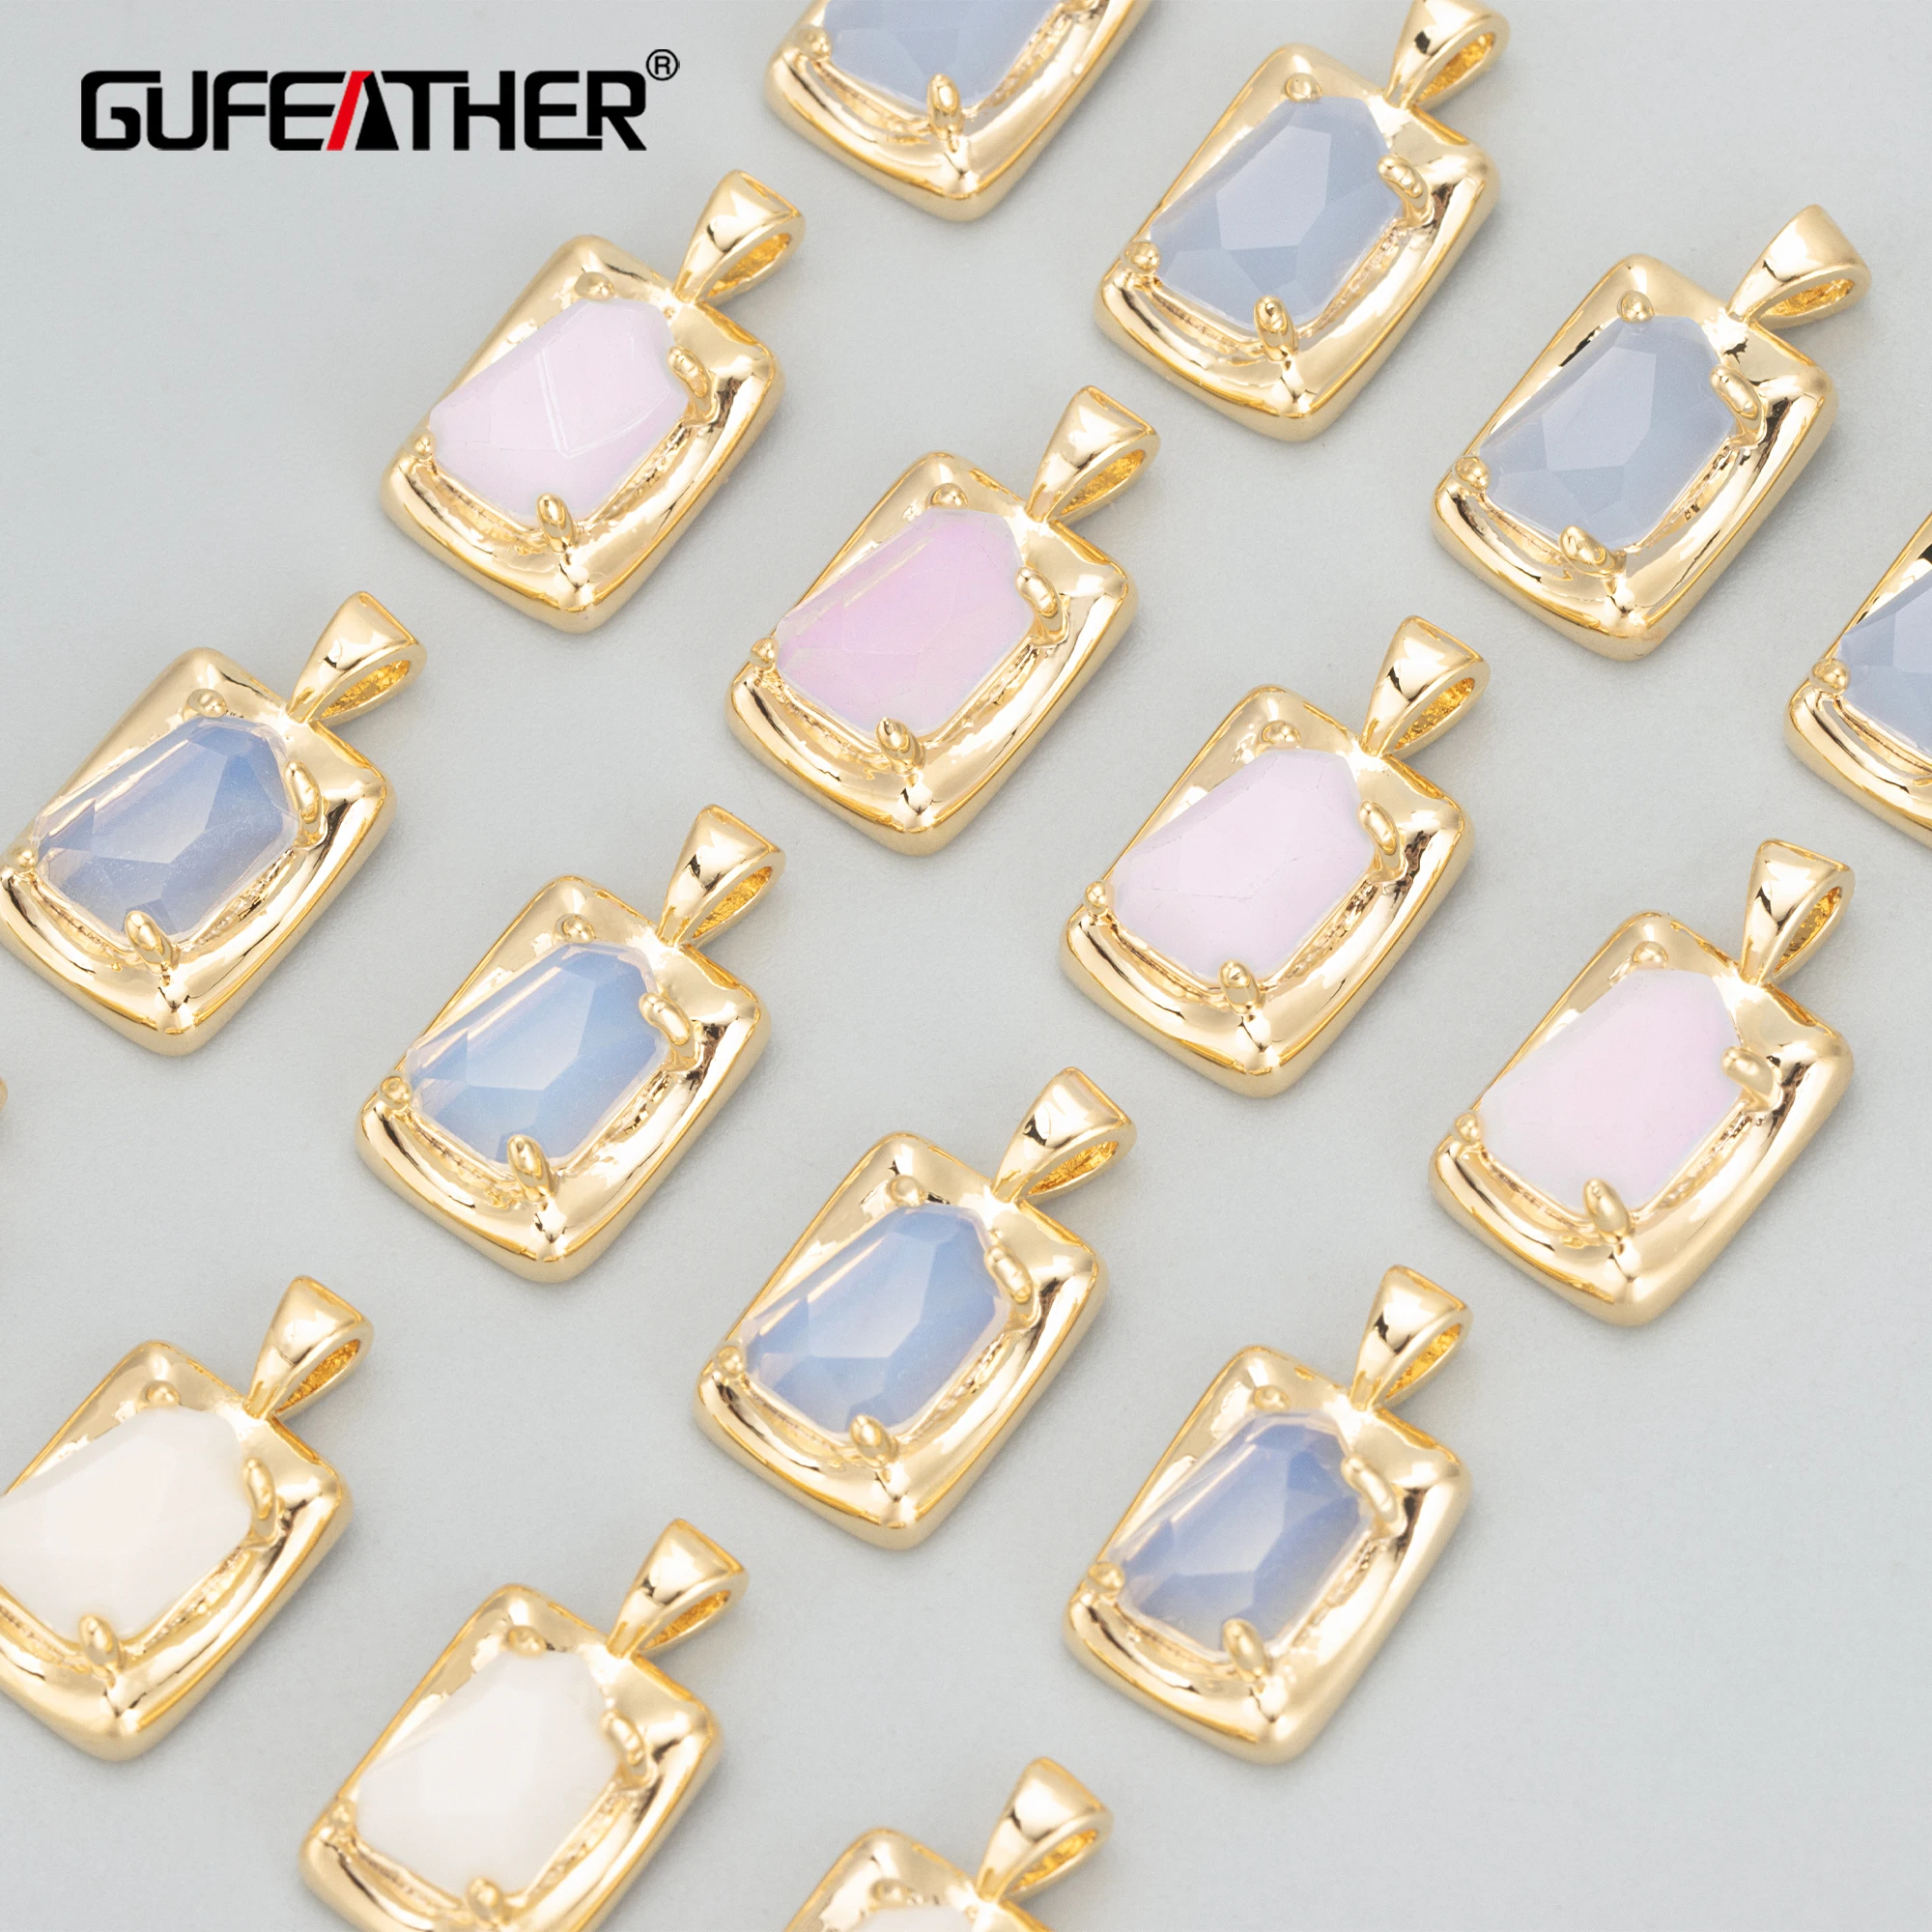 

GUFEATHER MD16,jewelry accessories,18k gold plated,nickel free,copper,natural stone,charms,jewelry making,diy pendants,6pcs/lot